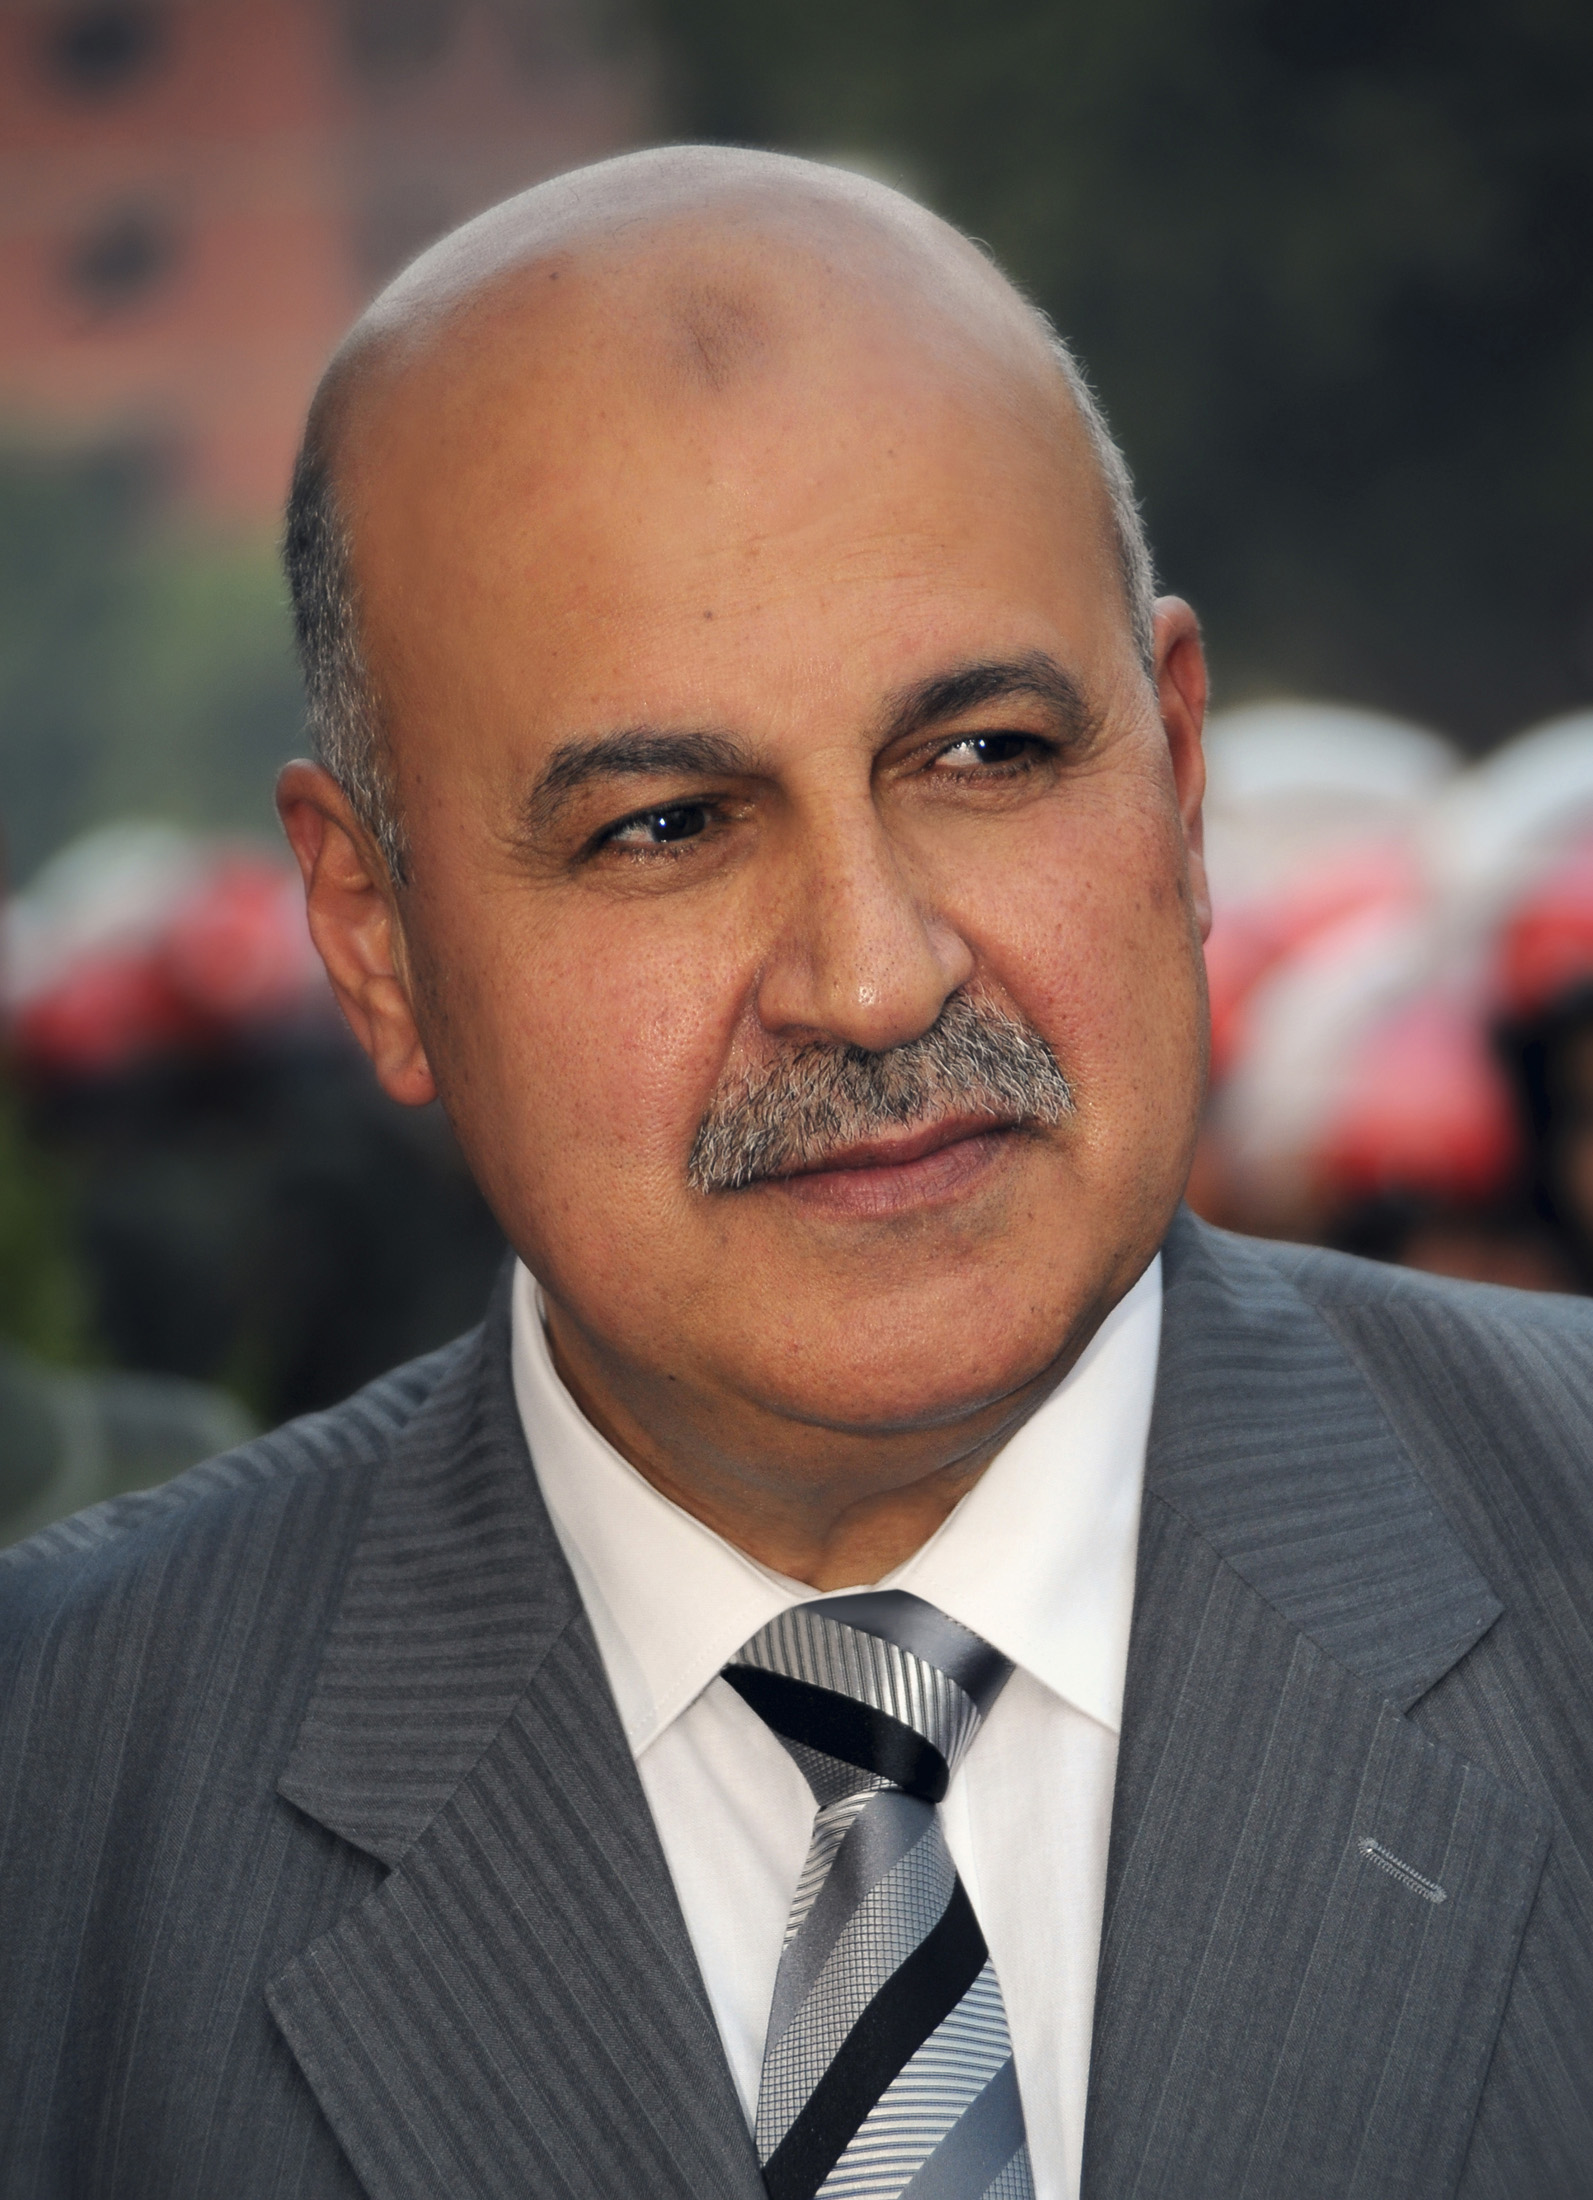 Egypt's vice president quits amid crisis